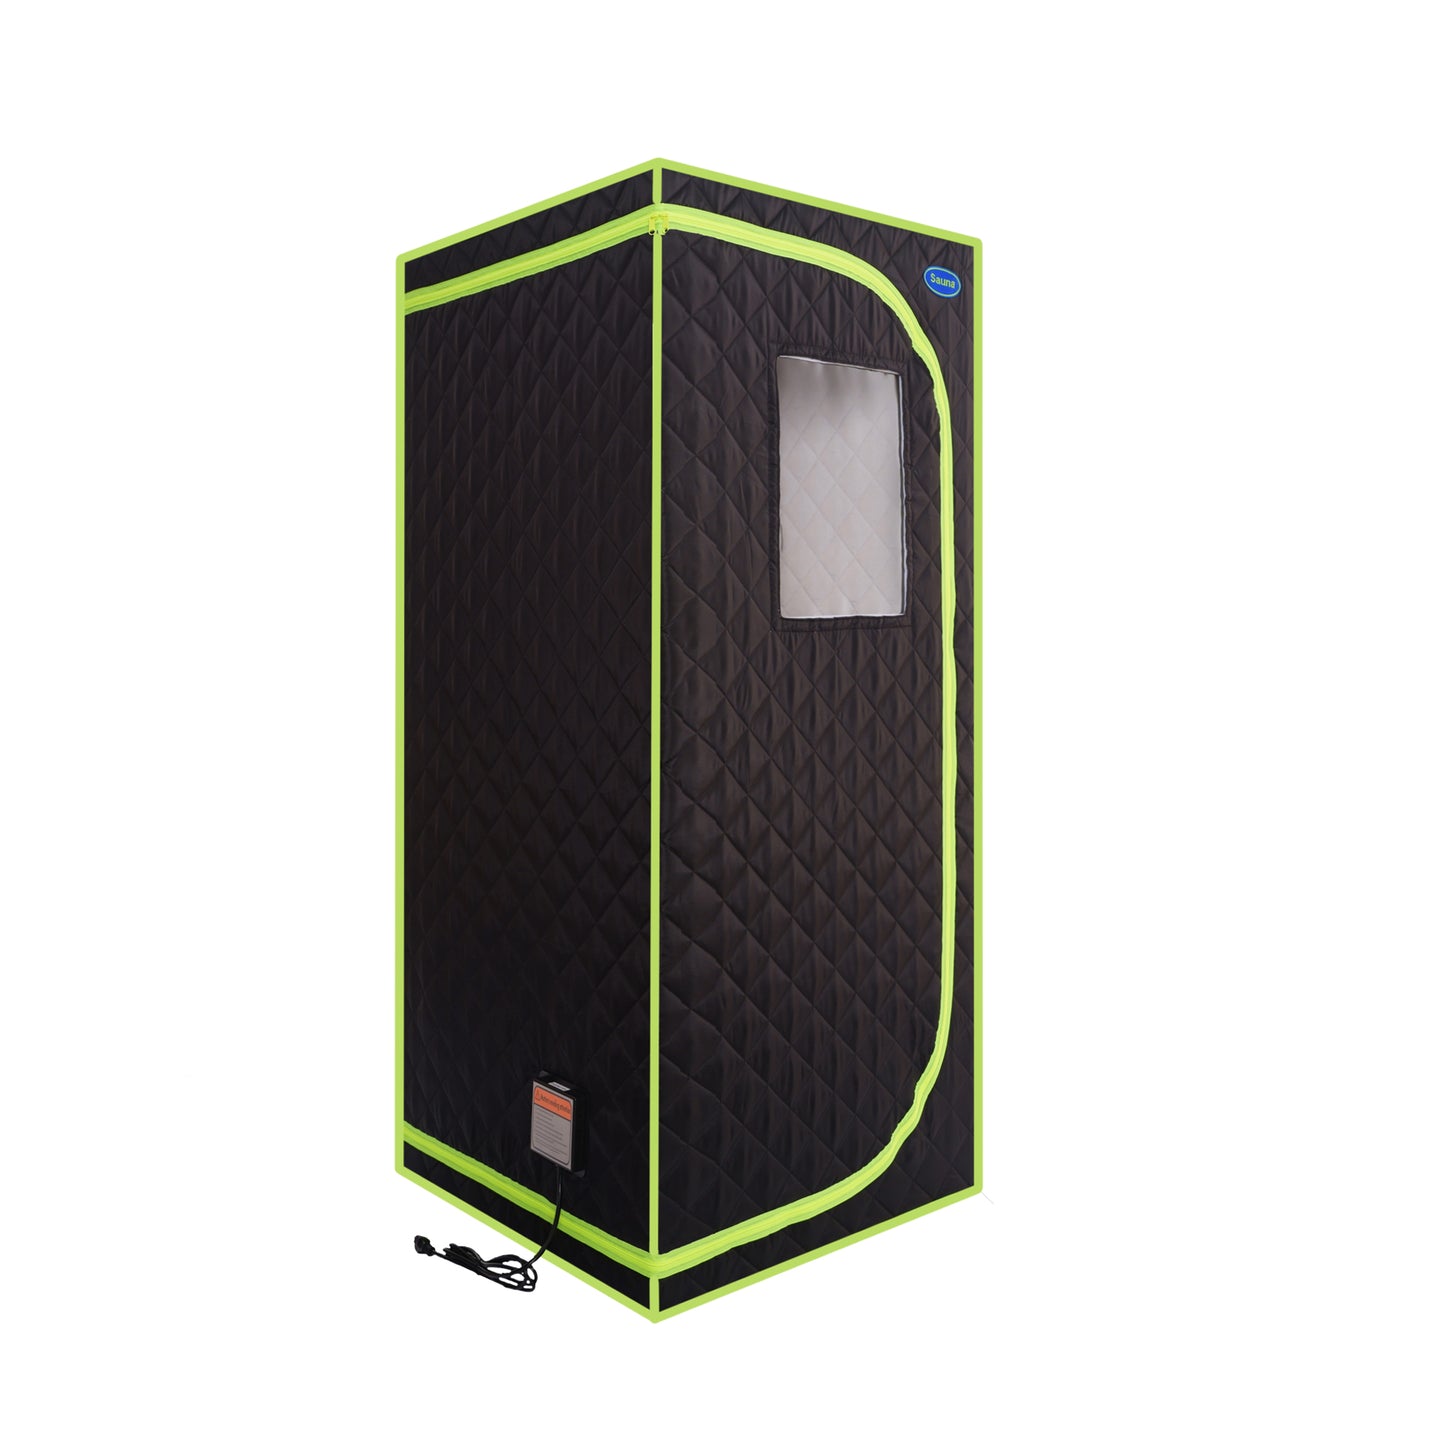 Portable Plus Type Full Size Far Infrared Sauna tent. Spa, Detox ,Therapy and Relaxation at home.Larger Space,Stainless Steel Pipes Connector Easy to Install, with FCC Certification--Black